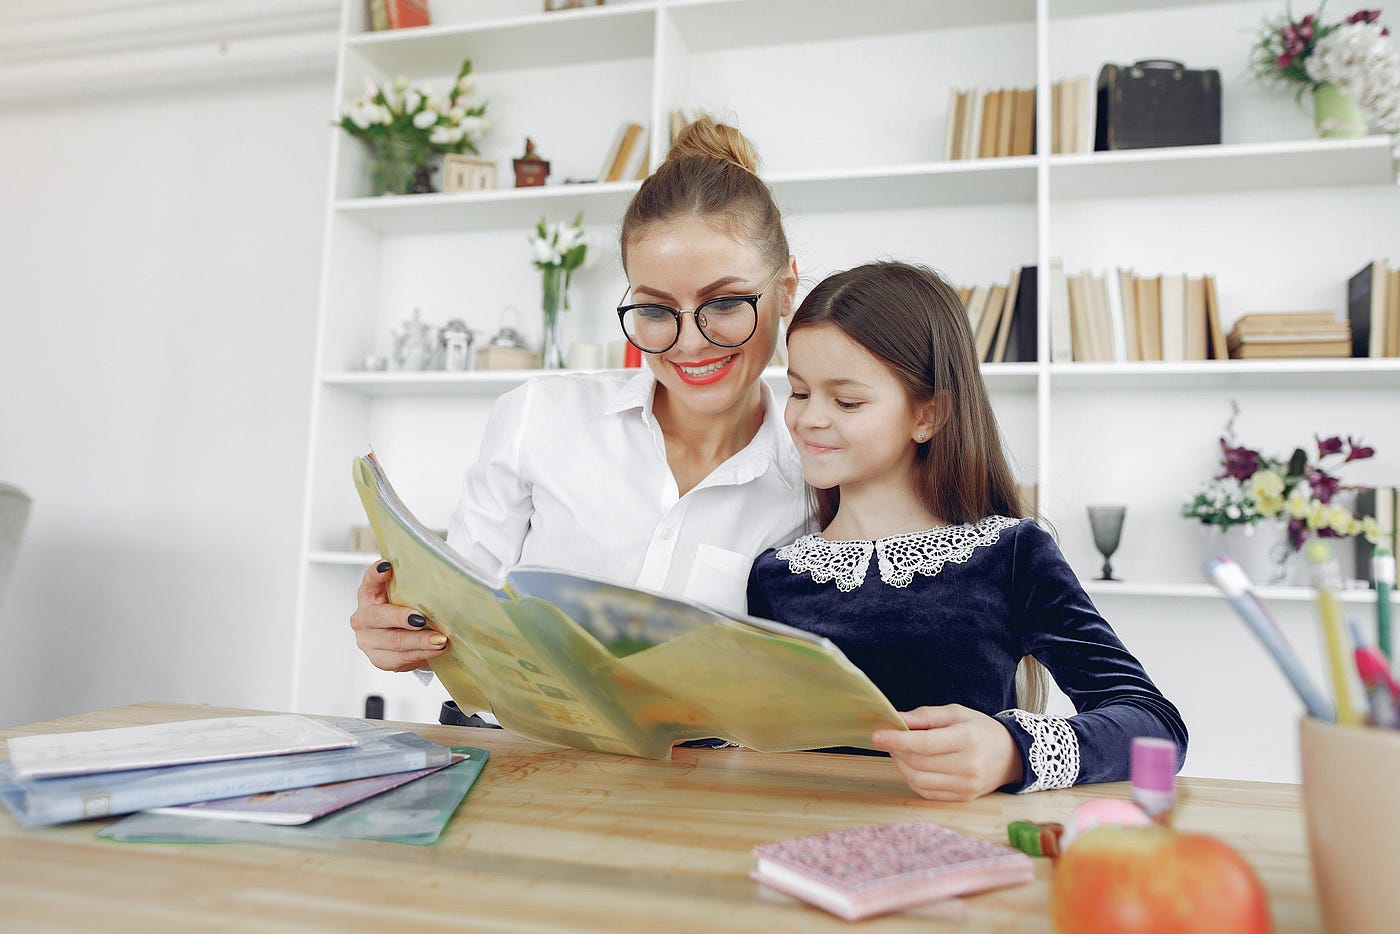 A woman and a young girl are smiling and reading a book together at a desk in a room with bookshelves and a bright, cozy atmosphere.